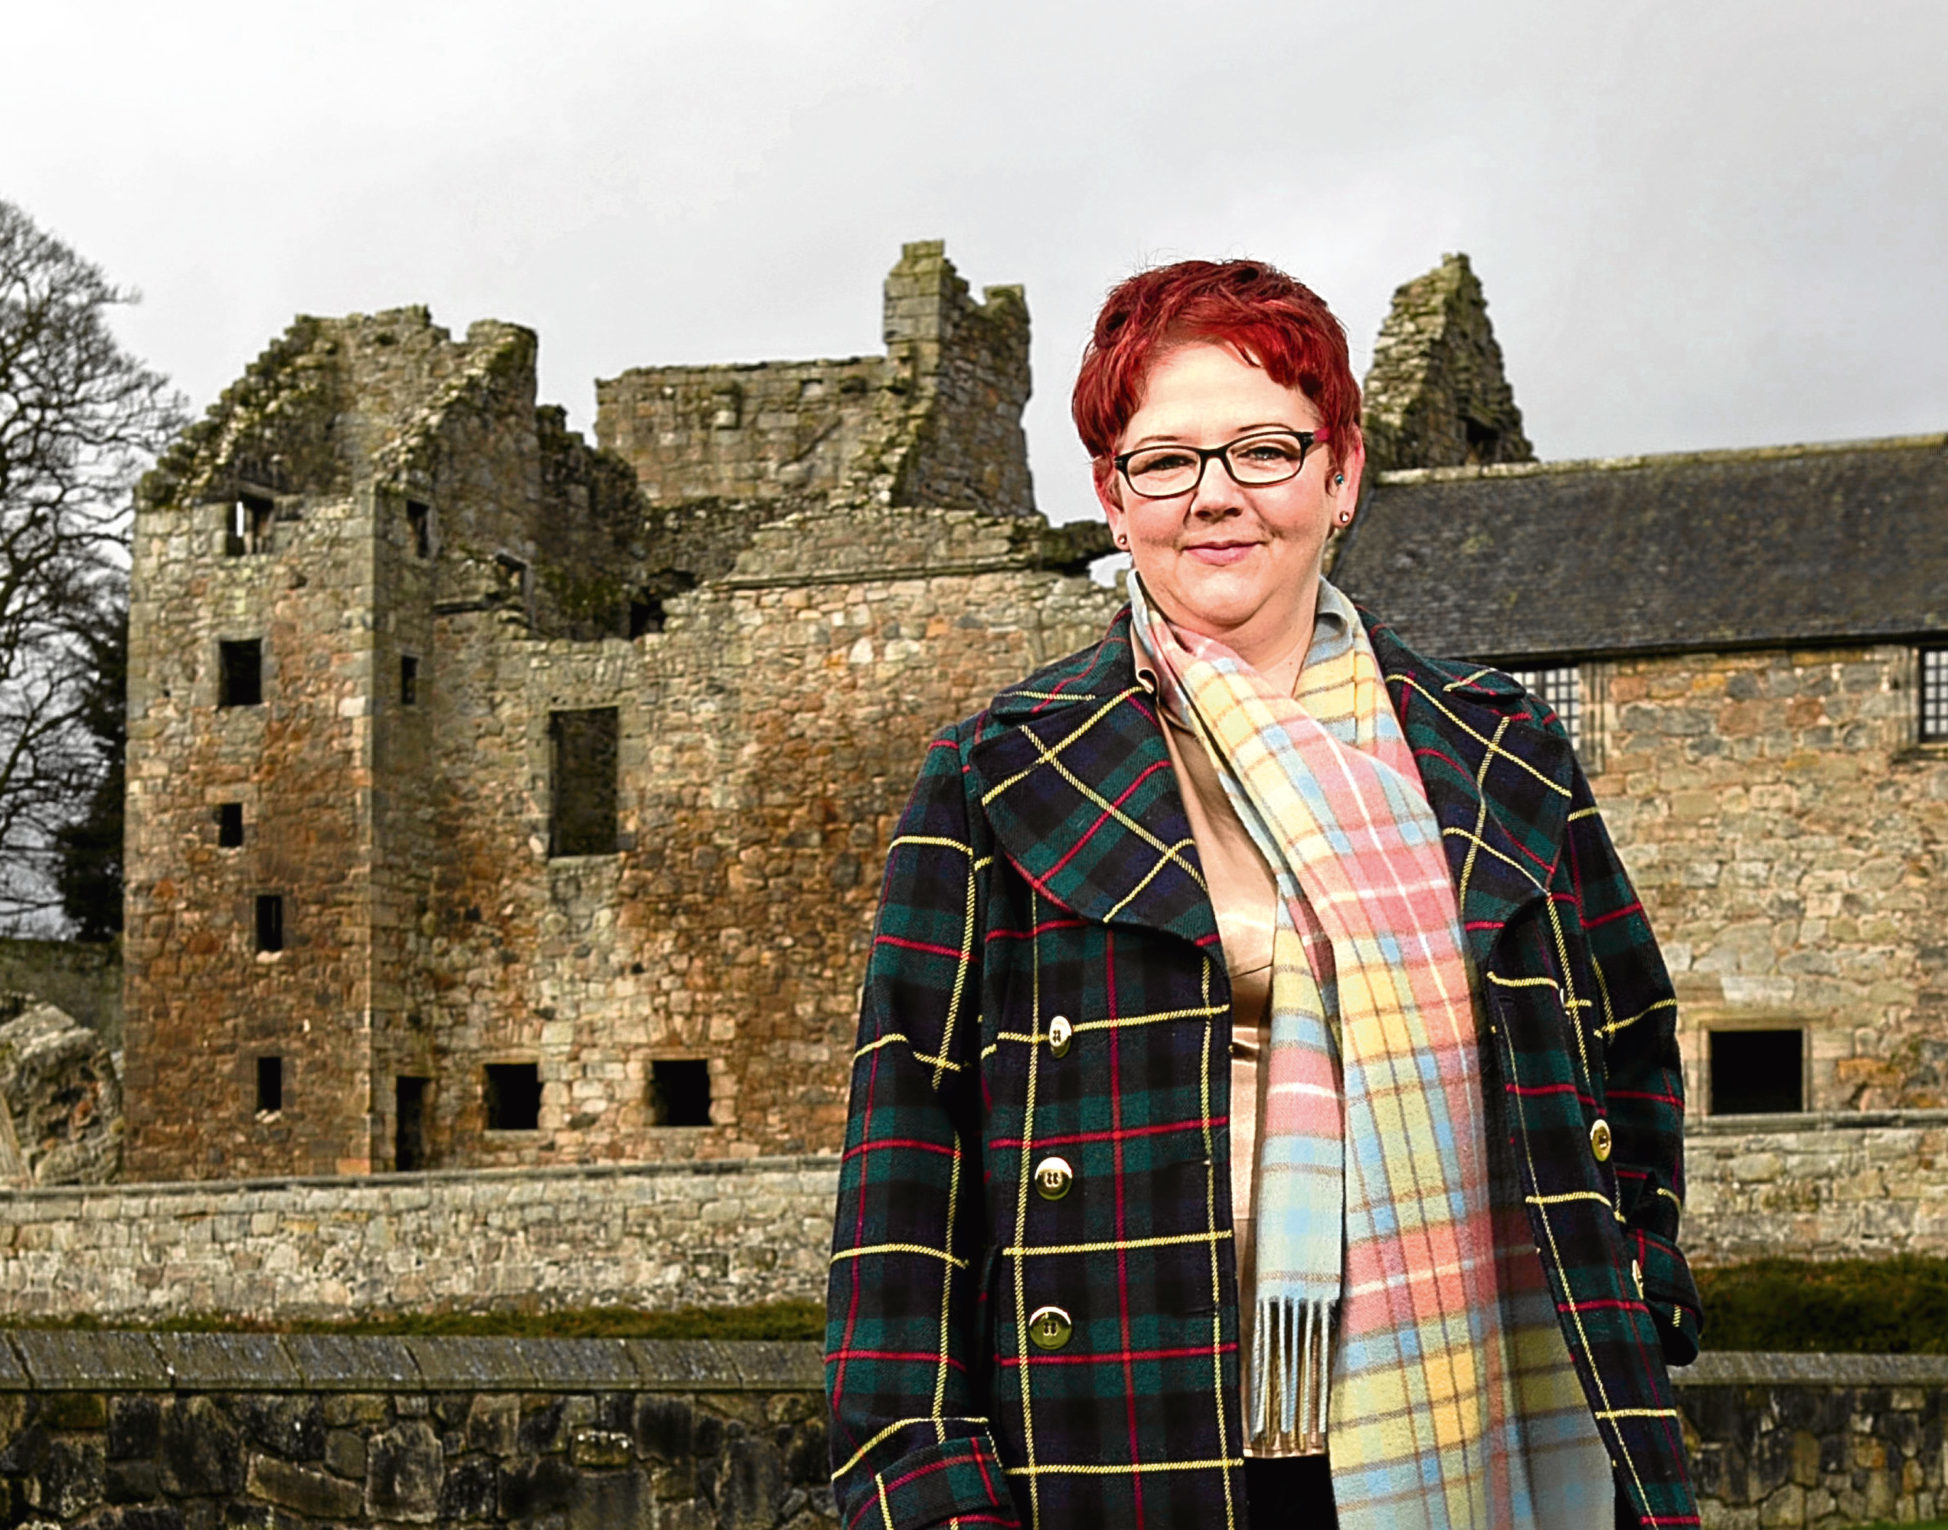 Shona Green at Aberdour Castle, near her home in Rosyth. (Andrew Cawley)